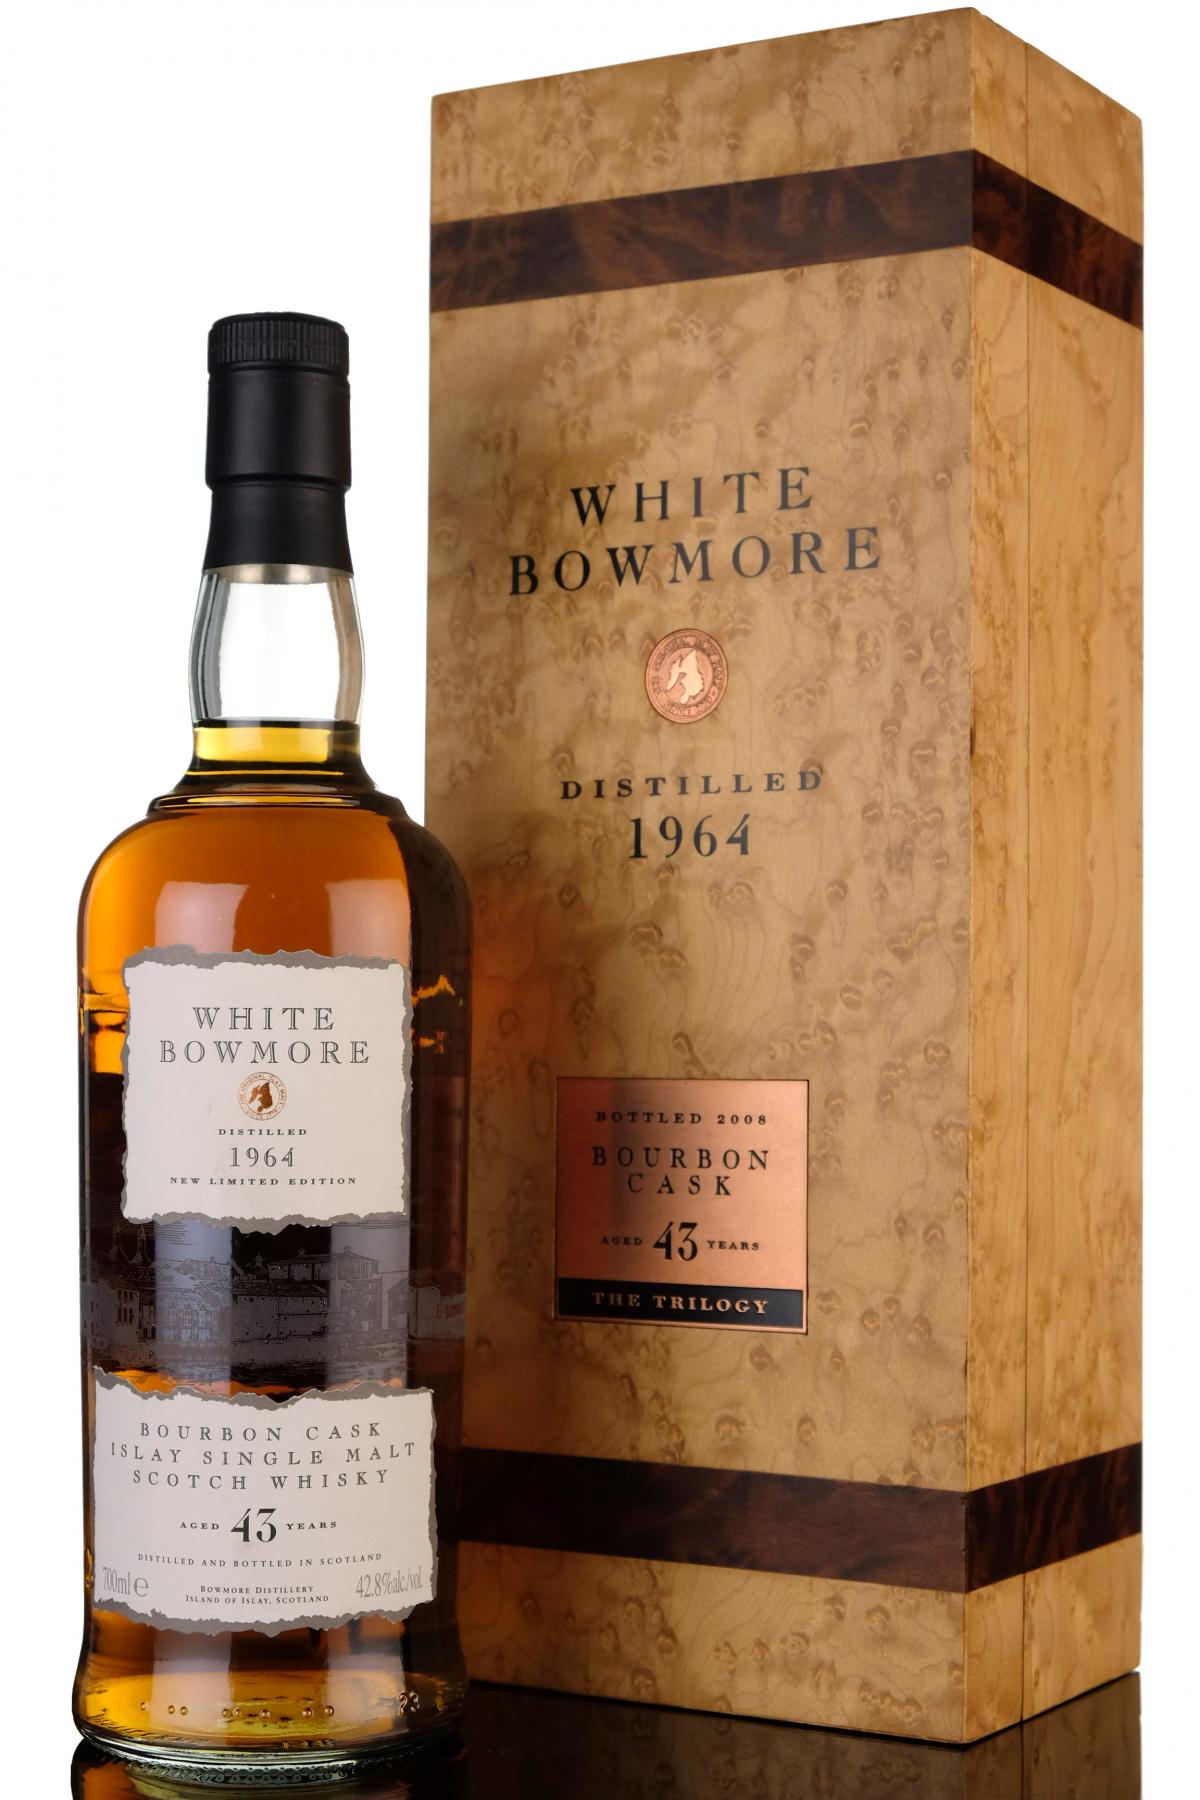 White Bowmore 1964 - 43 Year Old